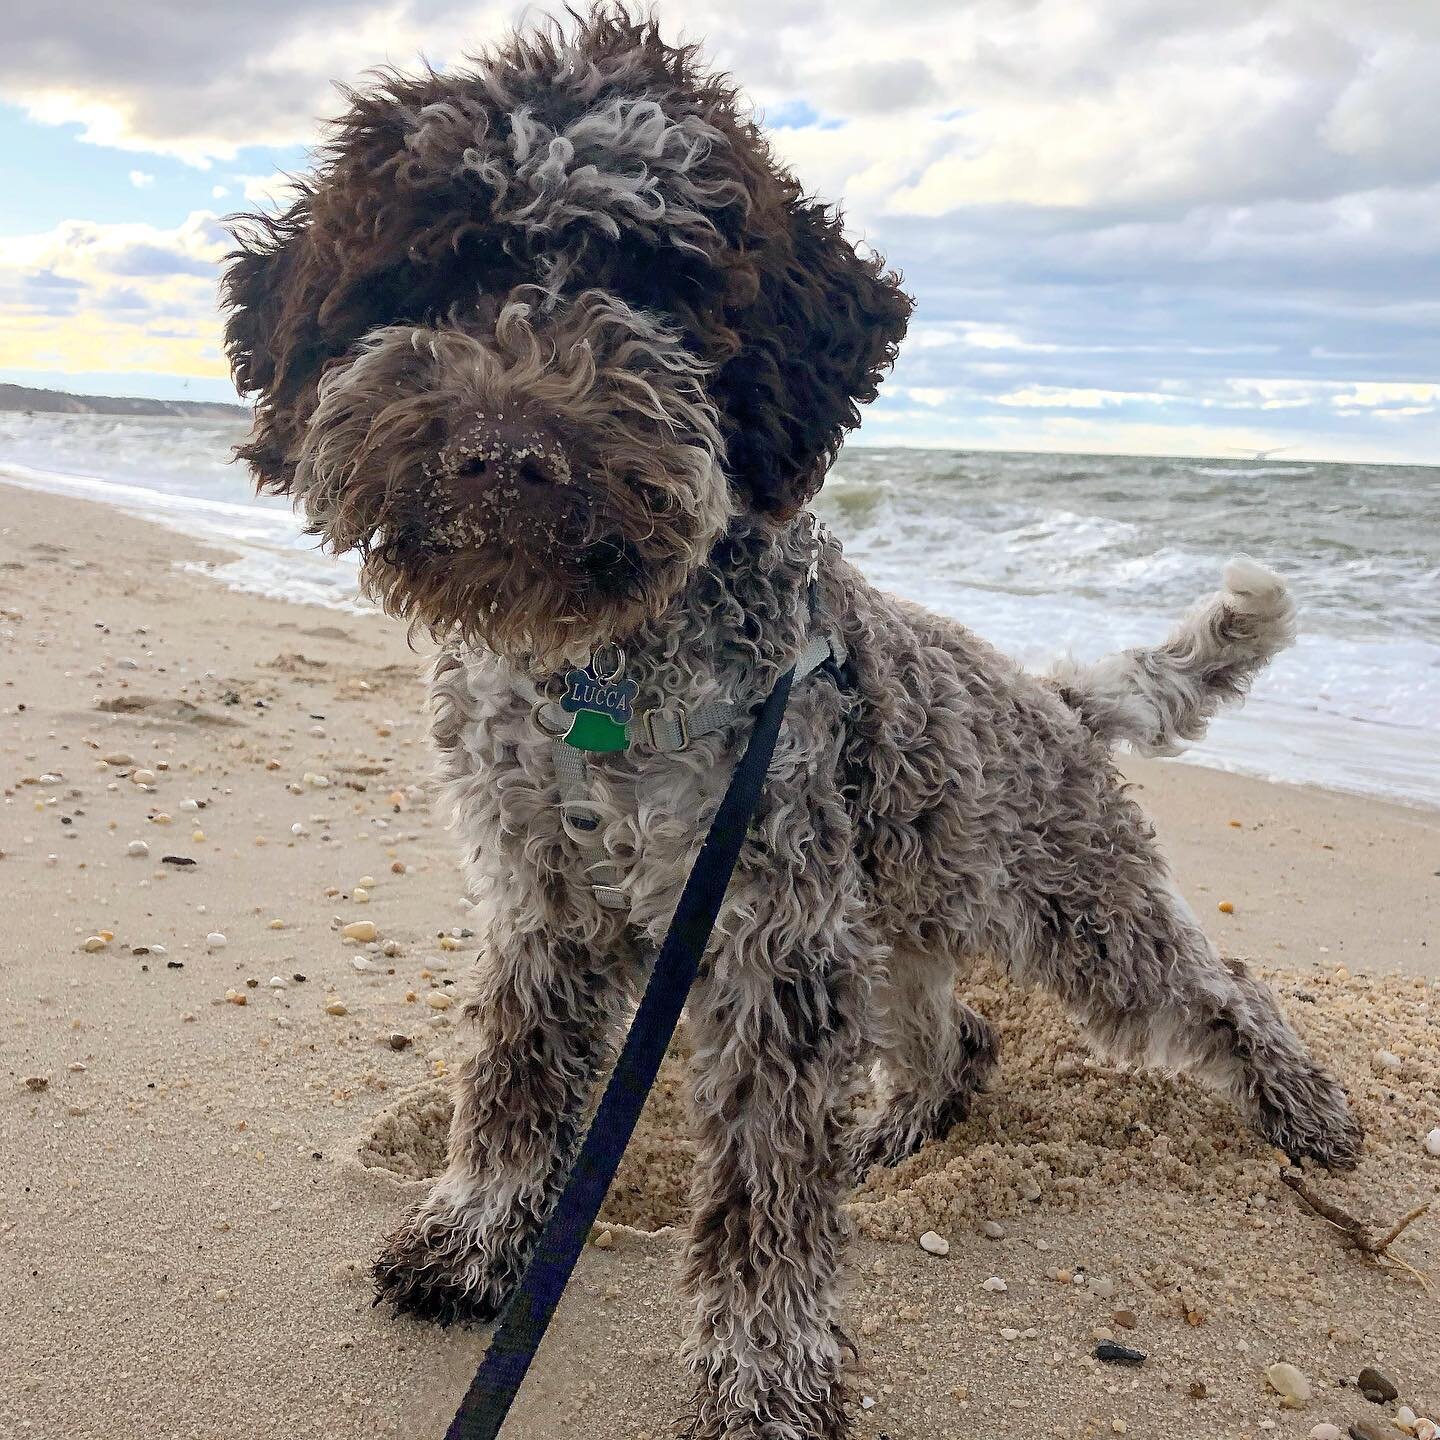 Happy National Puppy Day!! Celebrating our boy Lucca today and some of his favorite friends 🤩.
.
.
.

#italianwaterdog #lagottoromagnolo #dogsofinstagram  #dogslife #lagottosofinstagram 
#northfork #beachlife #throwbackthursday